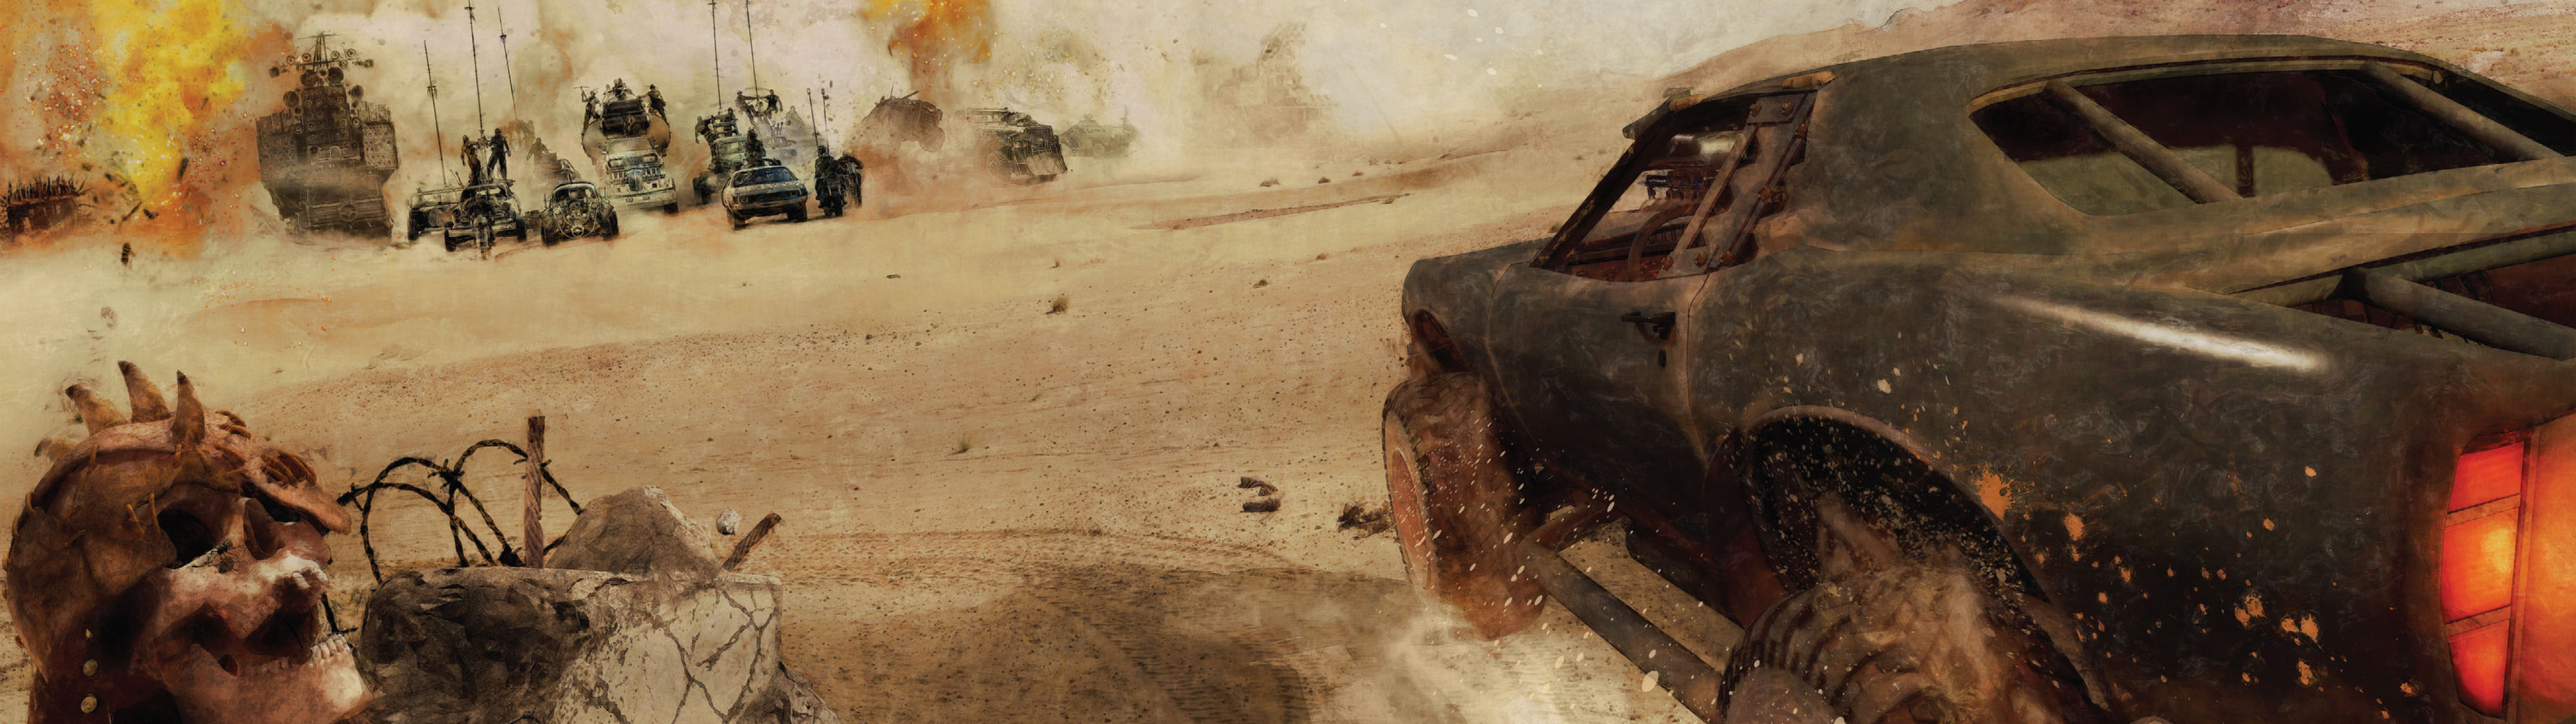 Download dual screen 1920x1080 Mad Max: Fury Road desktop background ID:137540 for free